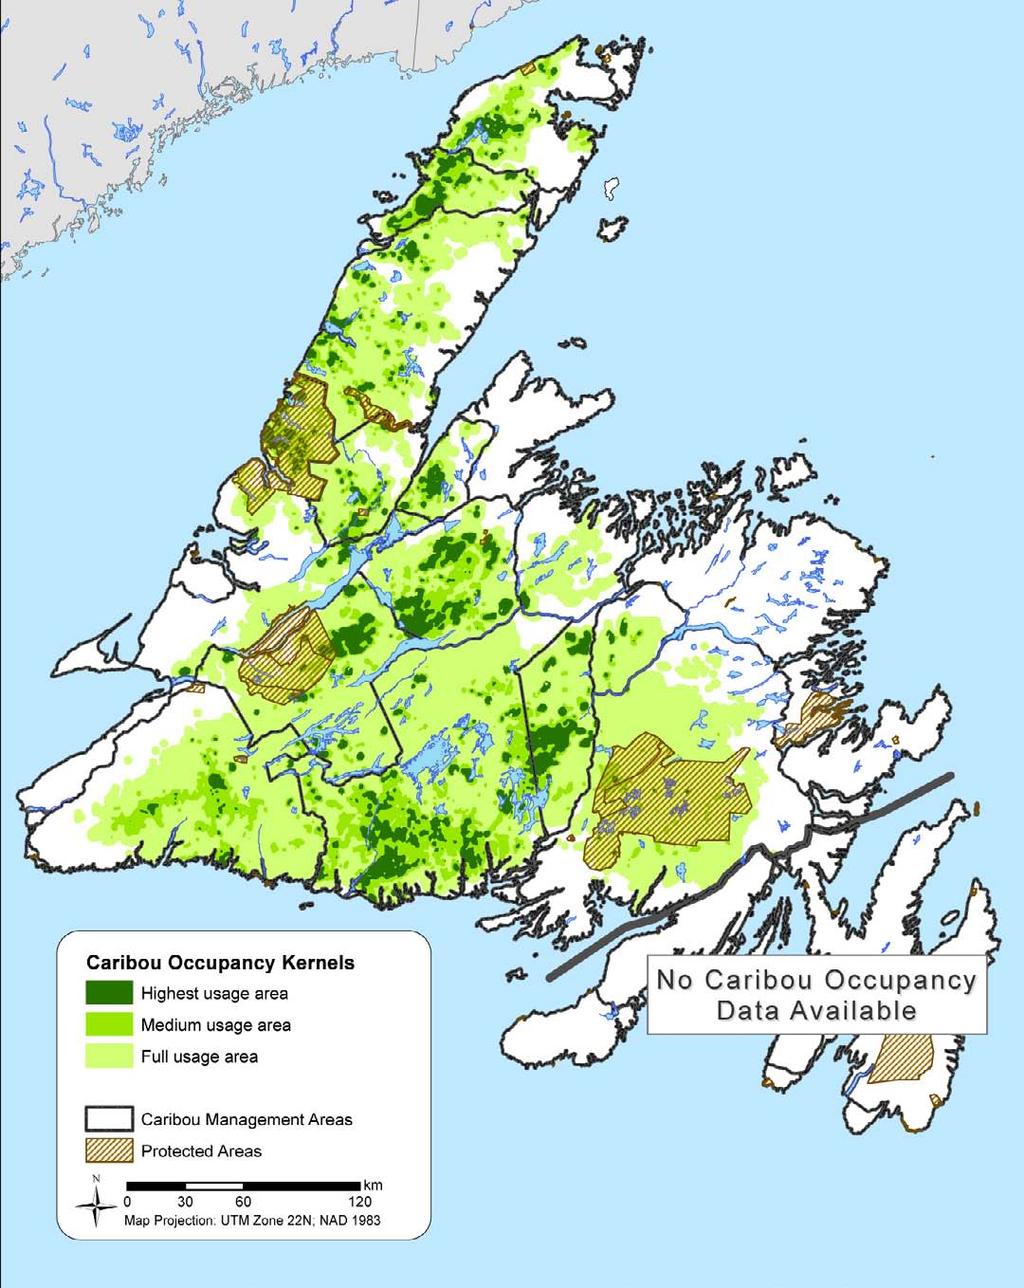 Figure 2 Areas of highest caribou use as determined by recent satellite and radio tracking of caribou in comparison to